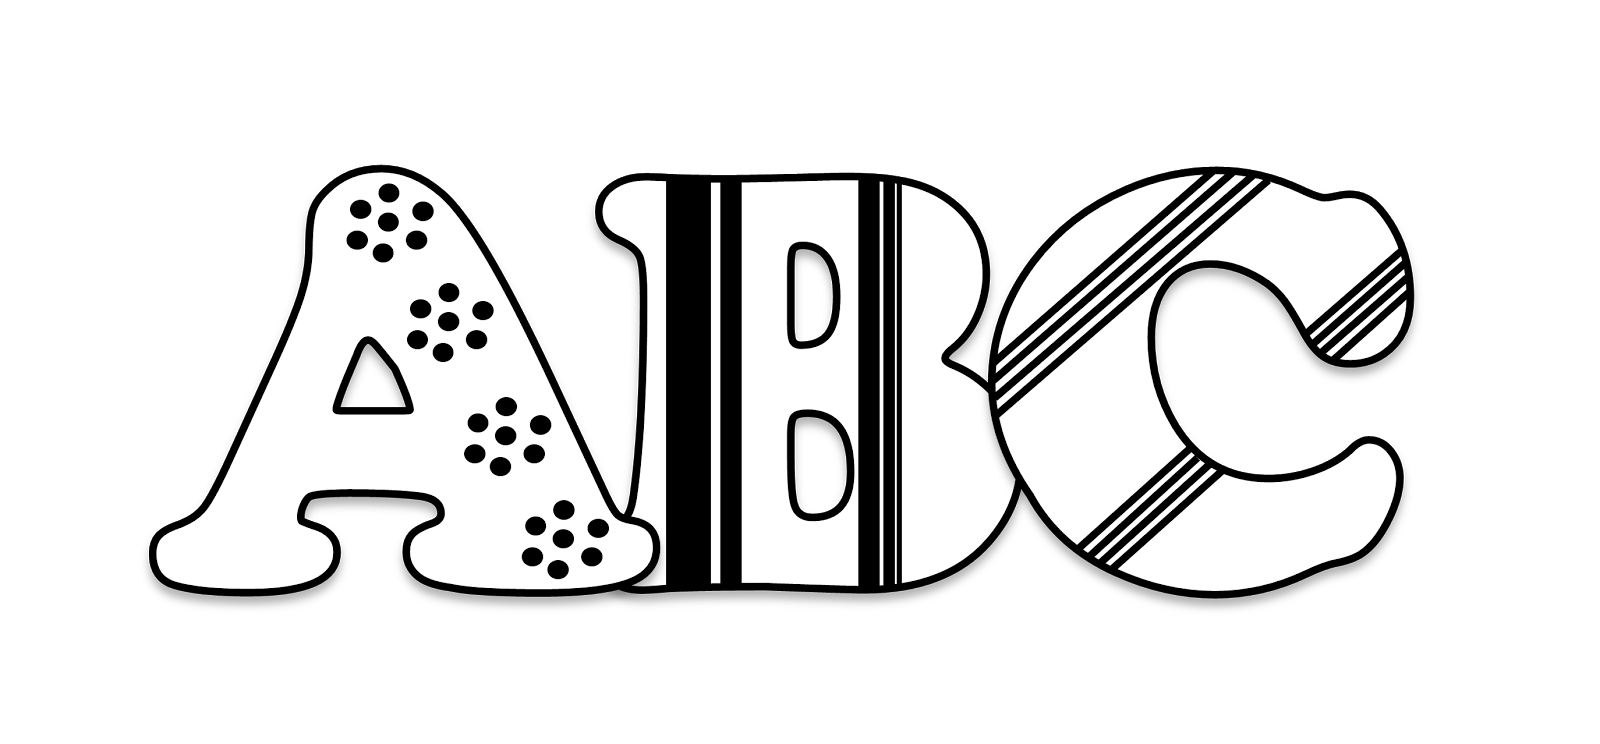 free-abc-clip-art-black-and-white-download-free-abc-clip-art-black-and